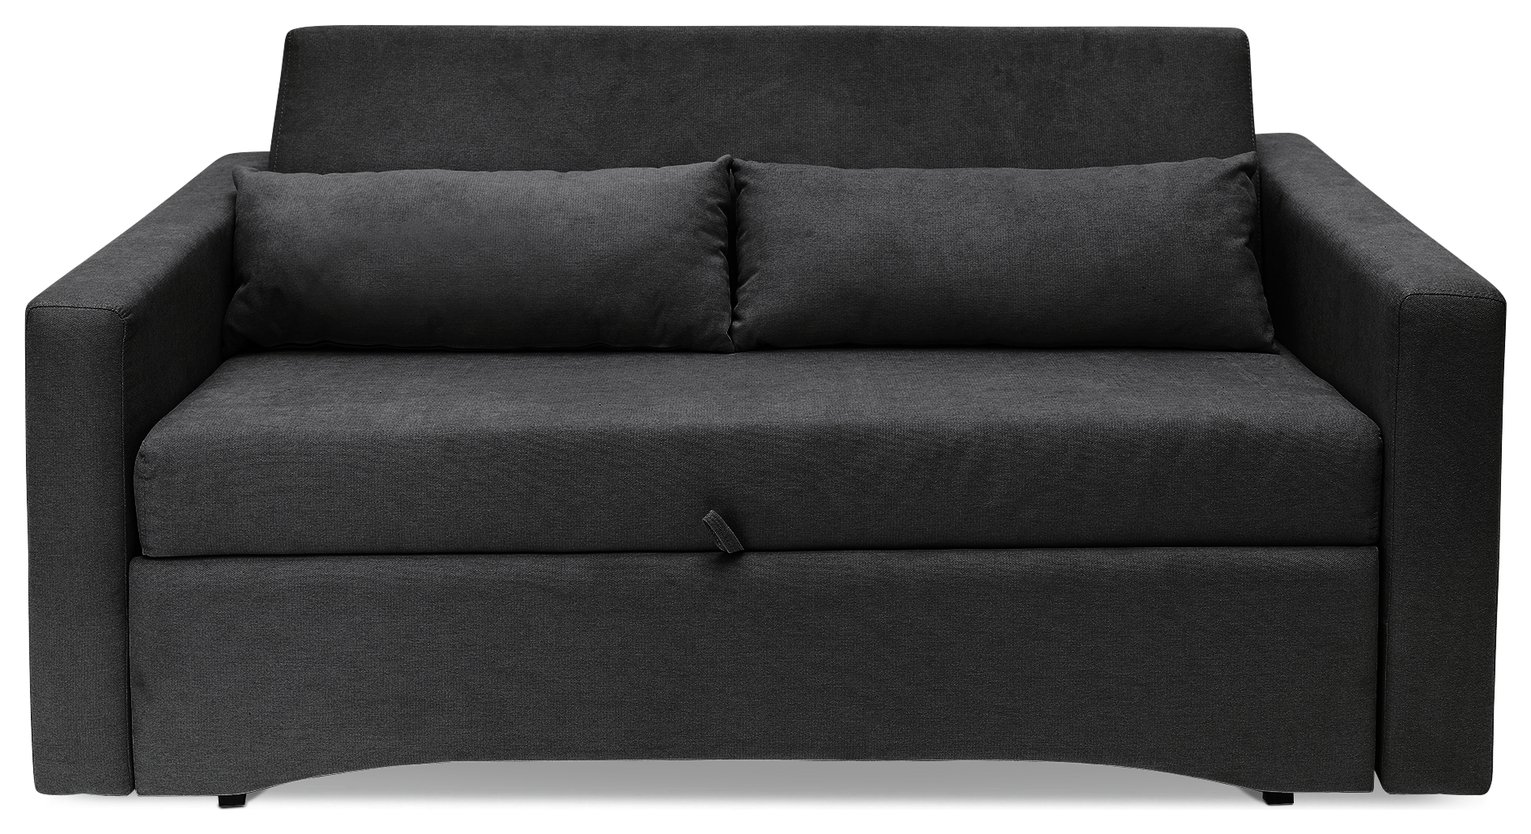 sofa bed 52 x72 pictures